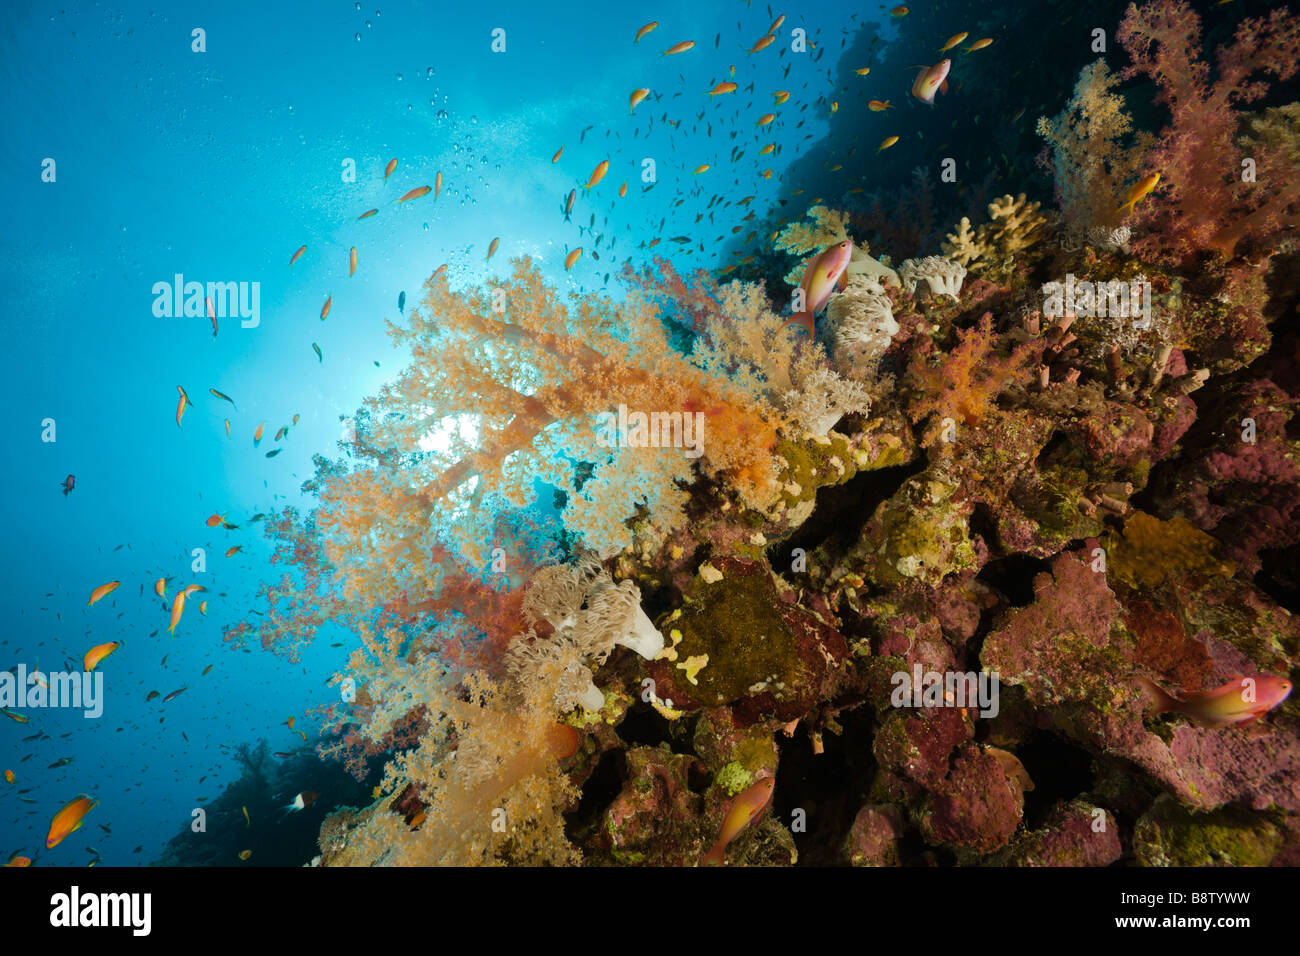 Colored Soft Corals Dentronephthya St Johns Reef Rotes Meer Egypt Stock Photo